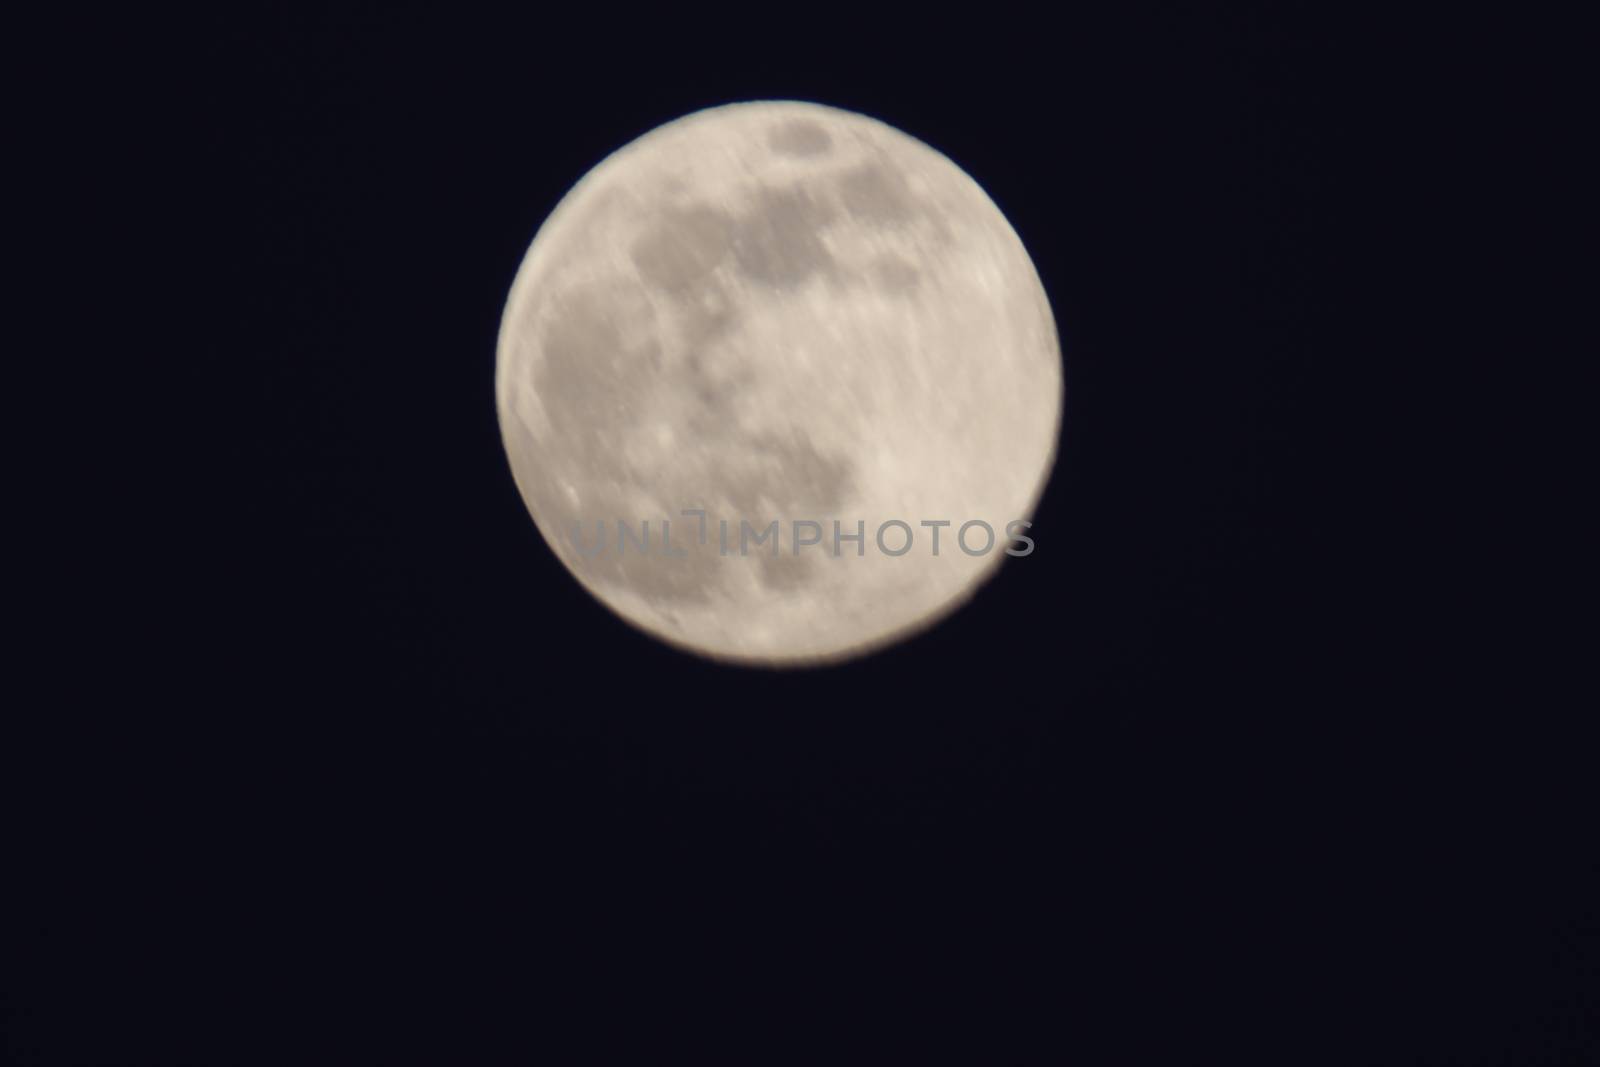 My first close-up pictures of a celestial body with a telephoto lens